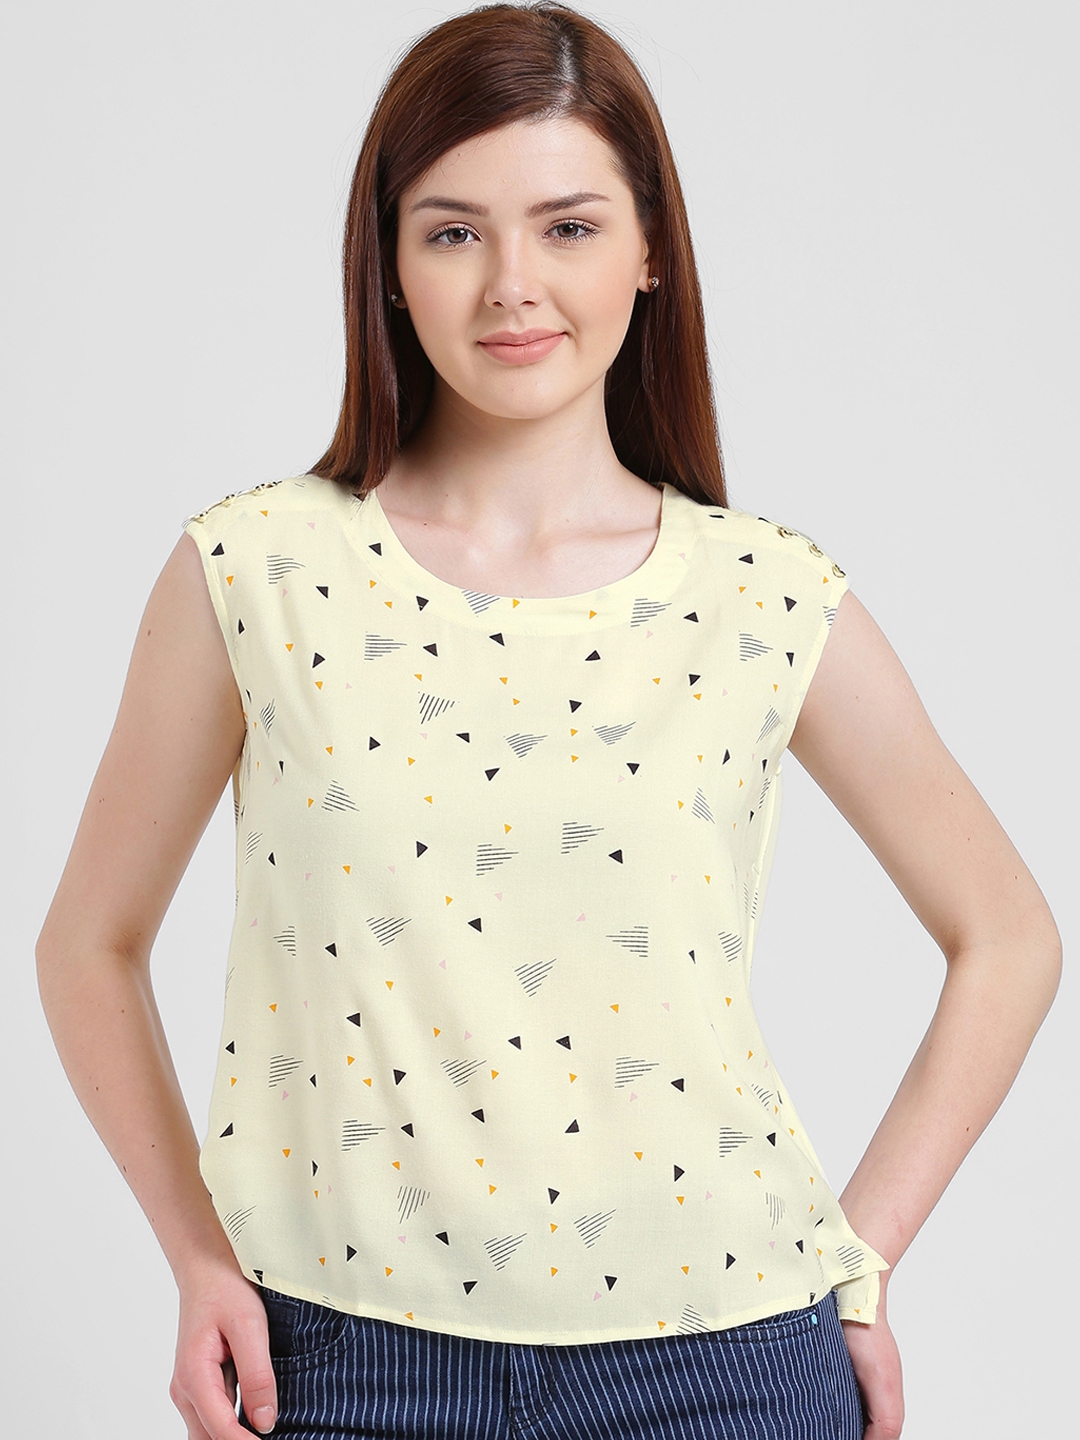 45% OFF on Harpa Women Navy Printed Top on Myntra